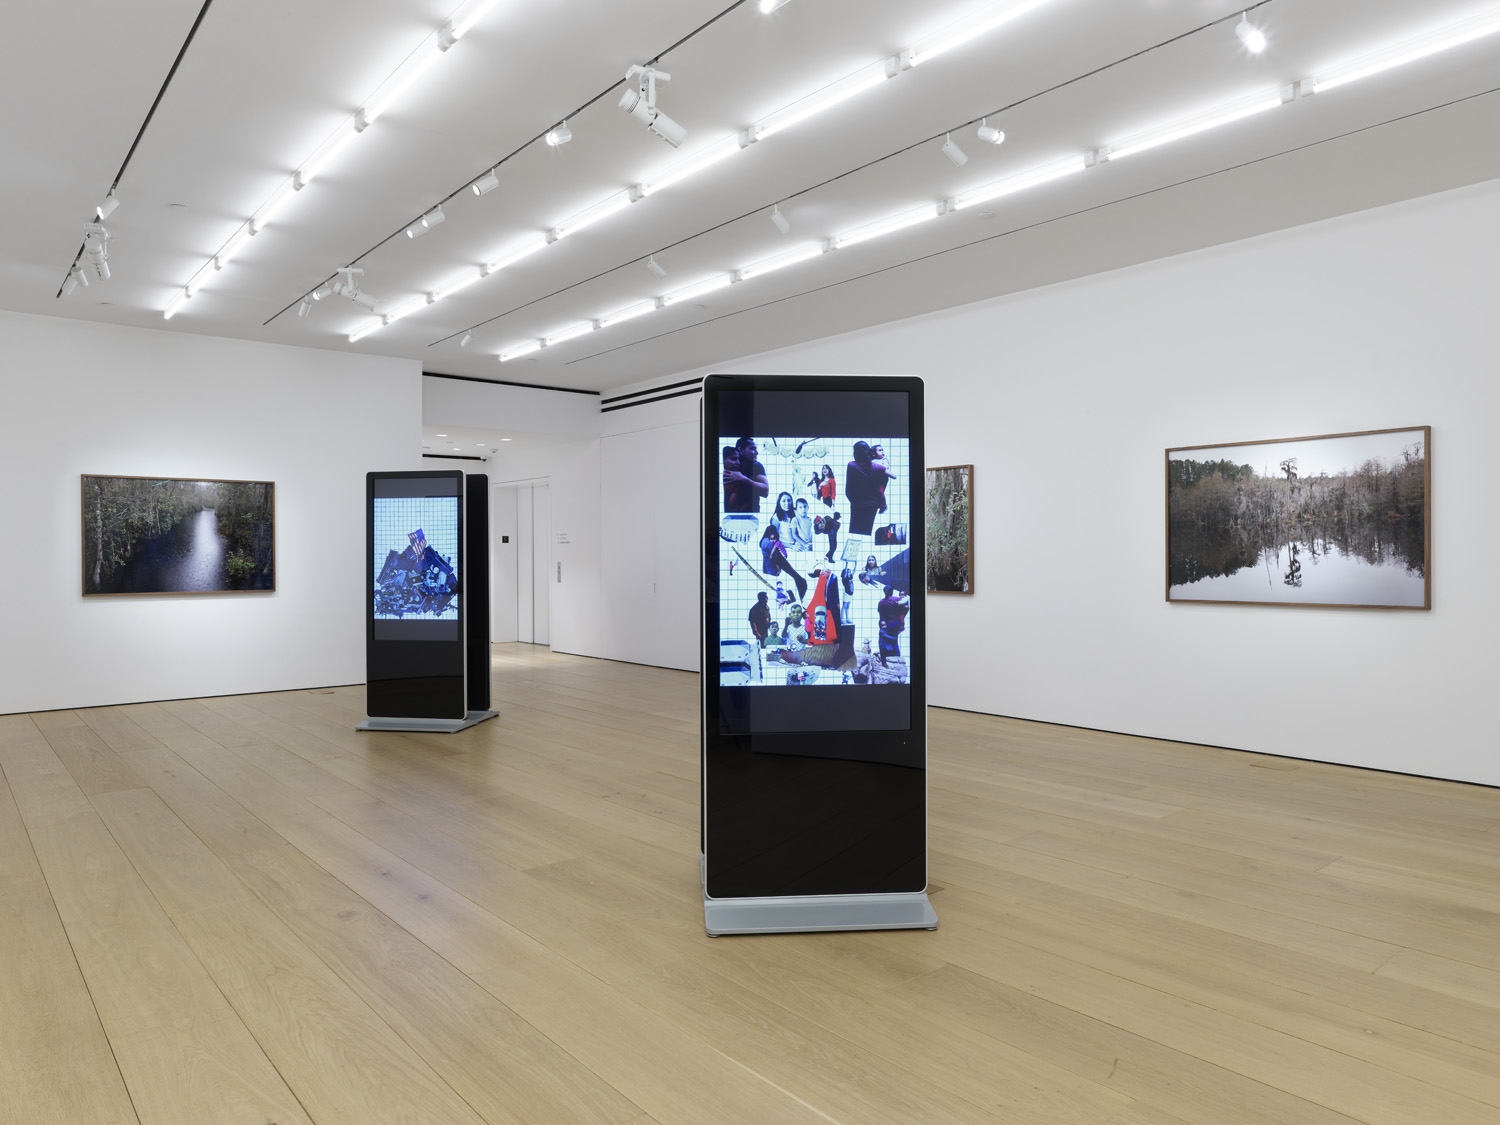 First installation view of the exhibition Catherine Opie: Rhetorical Landscapes at Lehmann Maupin New York